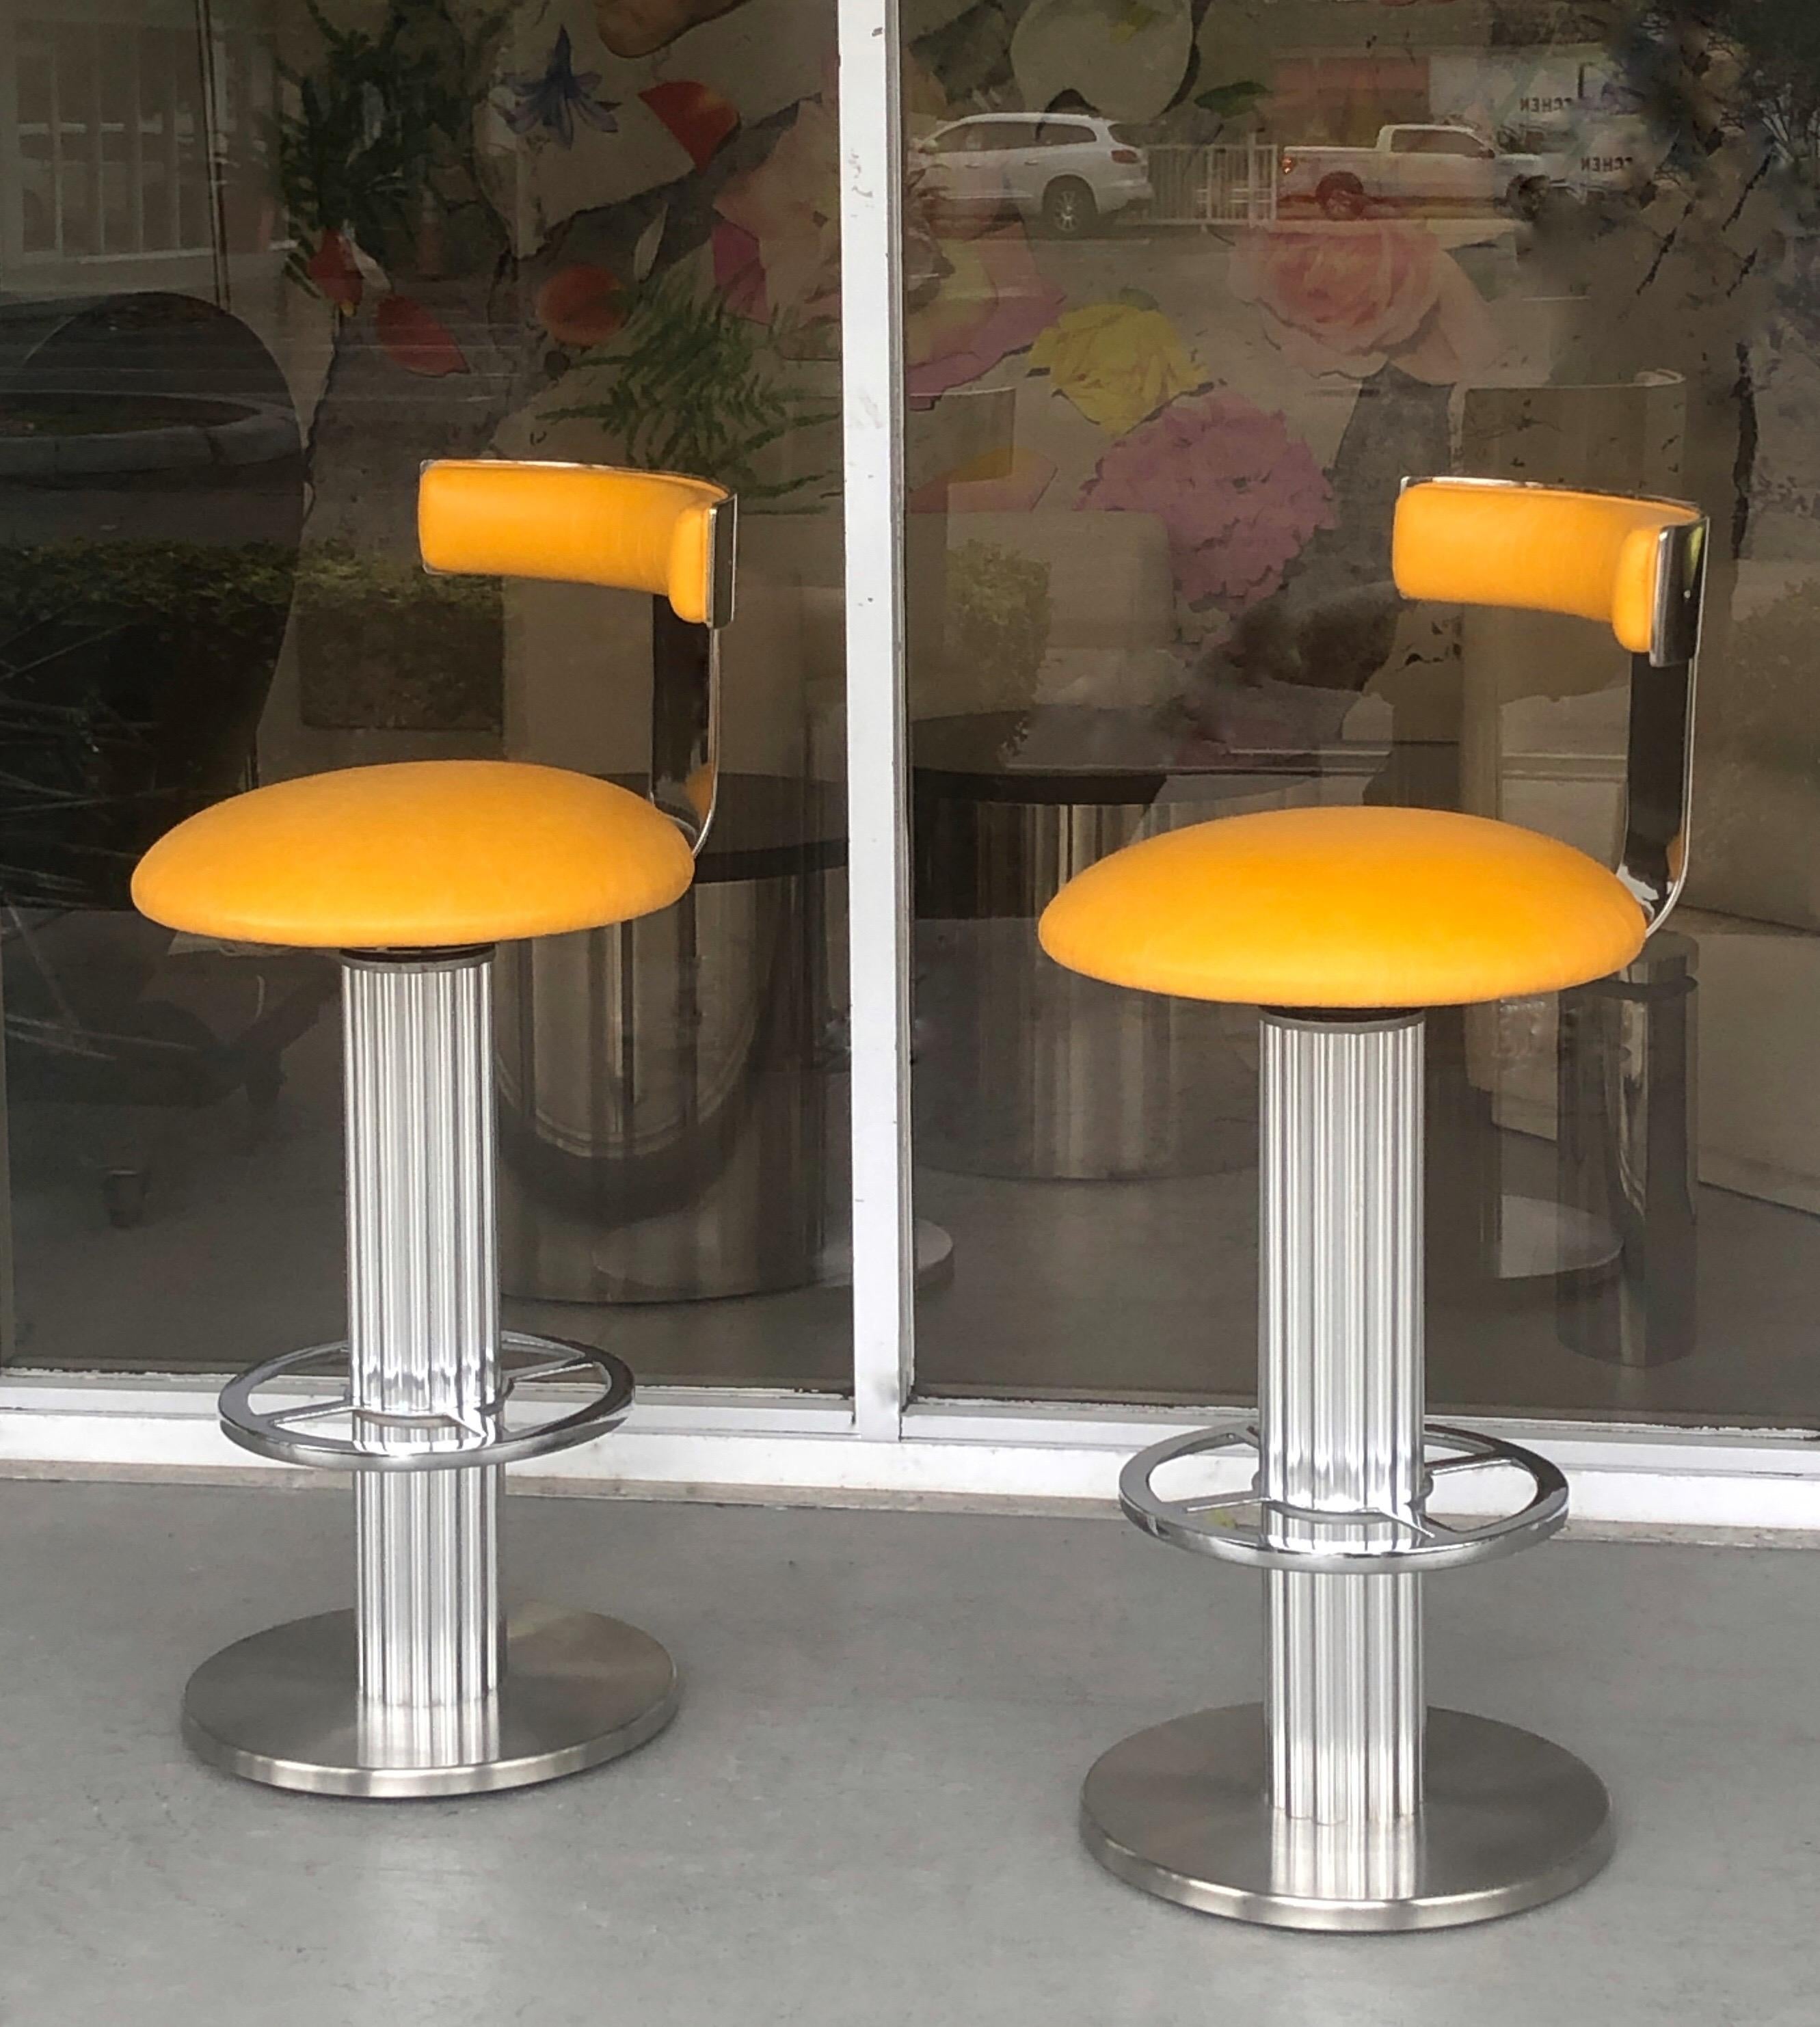 A pair of high end bar stools by Designed for a Leisure. Yellow leather upholstery. Seat swivel.